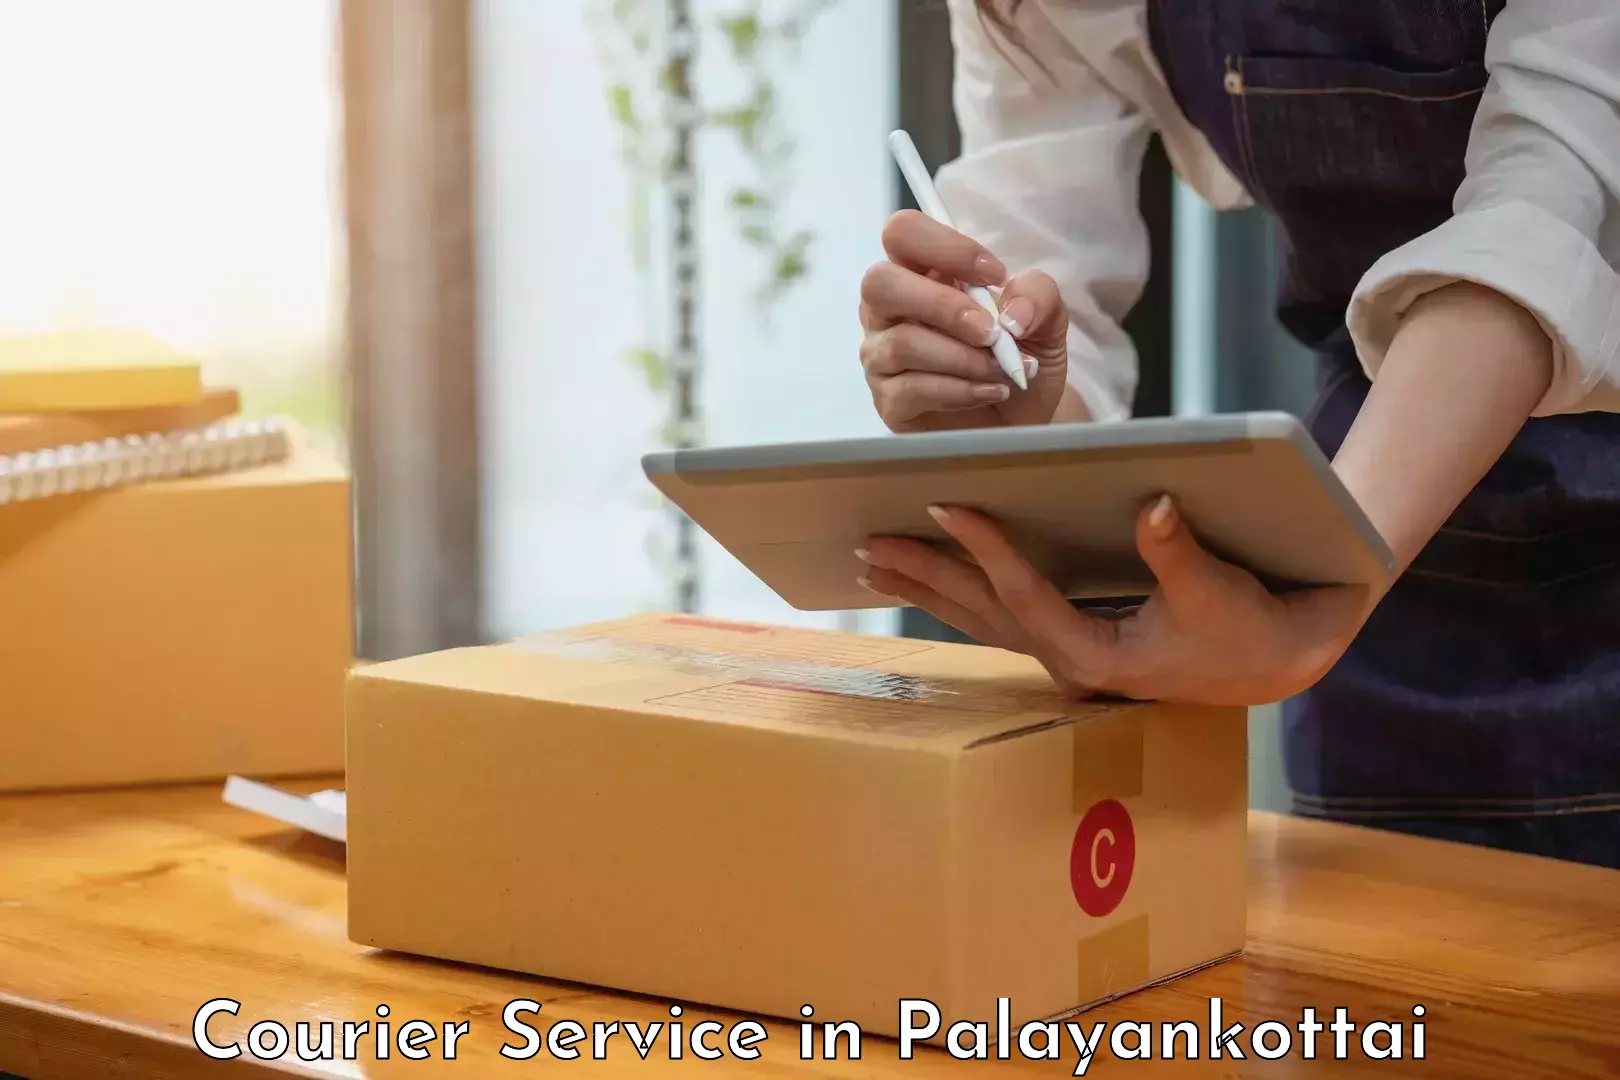 Same-day delivery solutions in Palayankottai